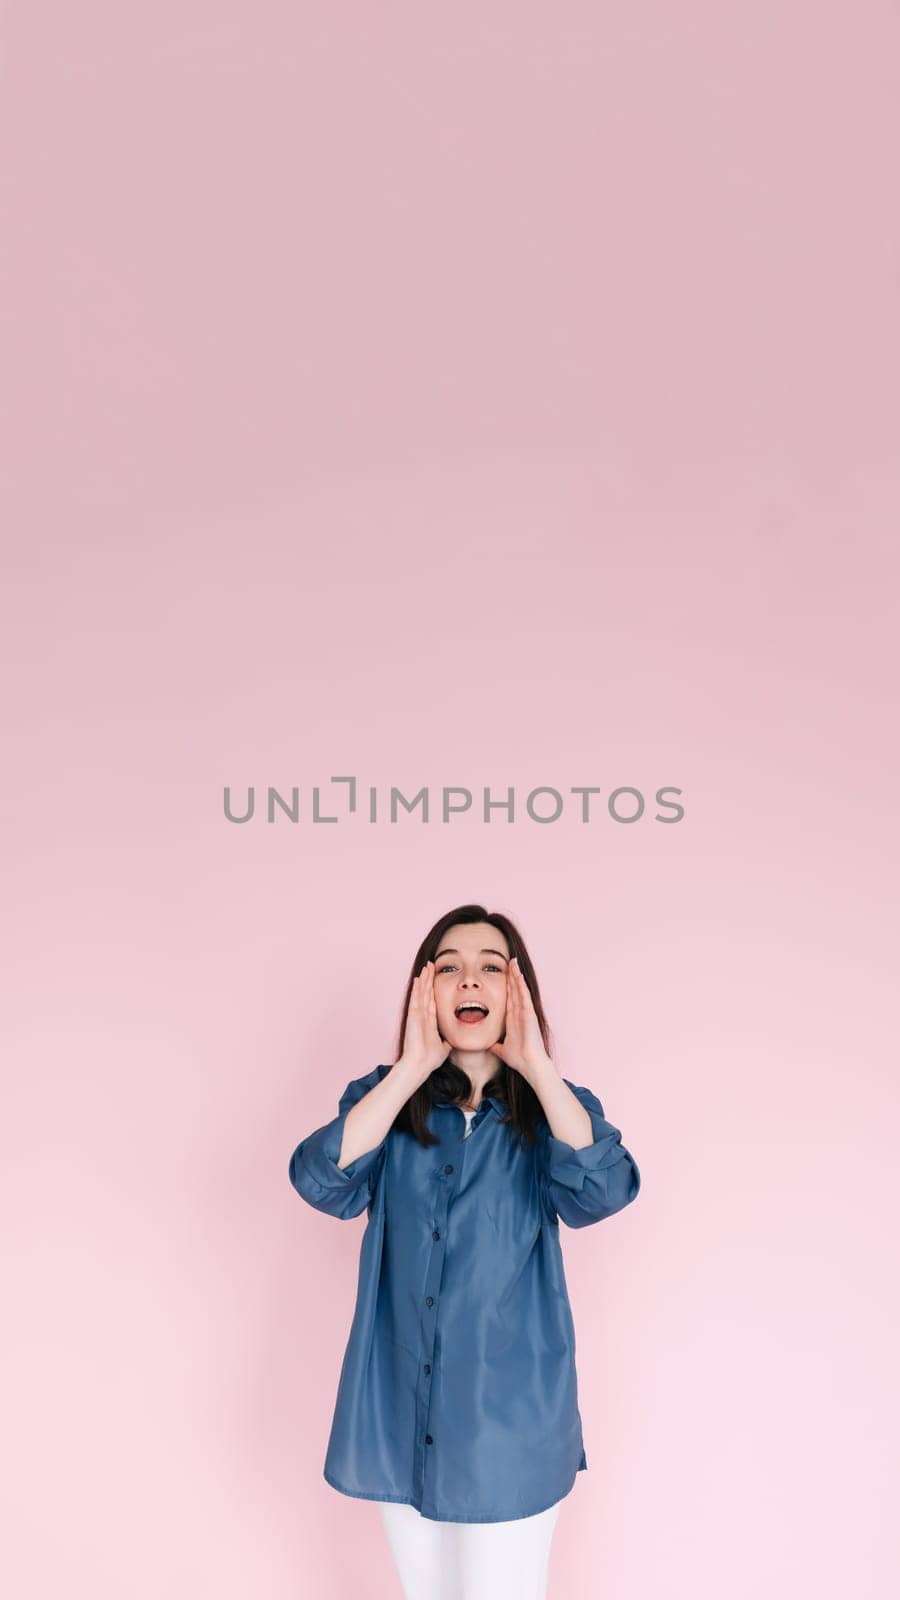 Portrait of young woman with joyous expression, hands near open mouth as if sharing news or telling a funny story, beaming a big toothy smile, isolated on bright pink background, Vertical photography